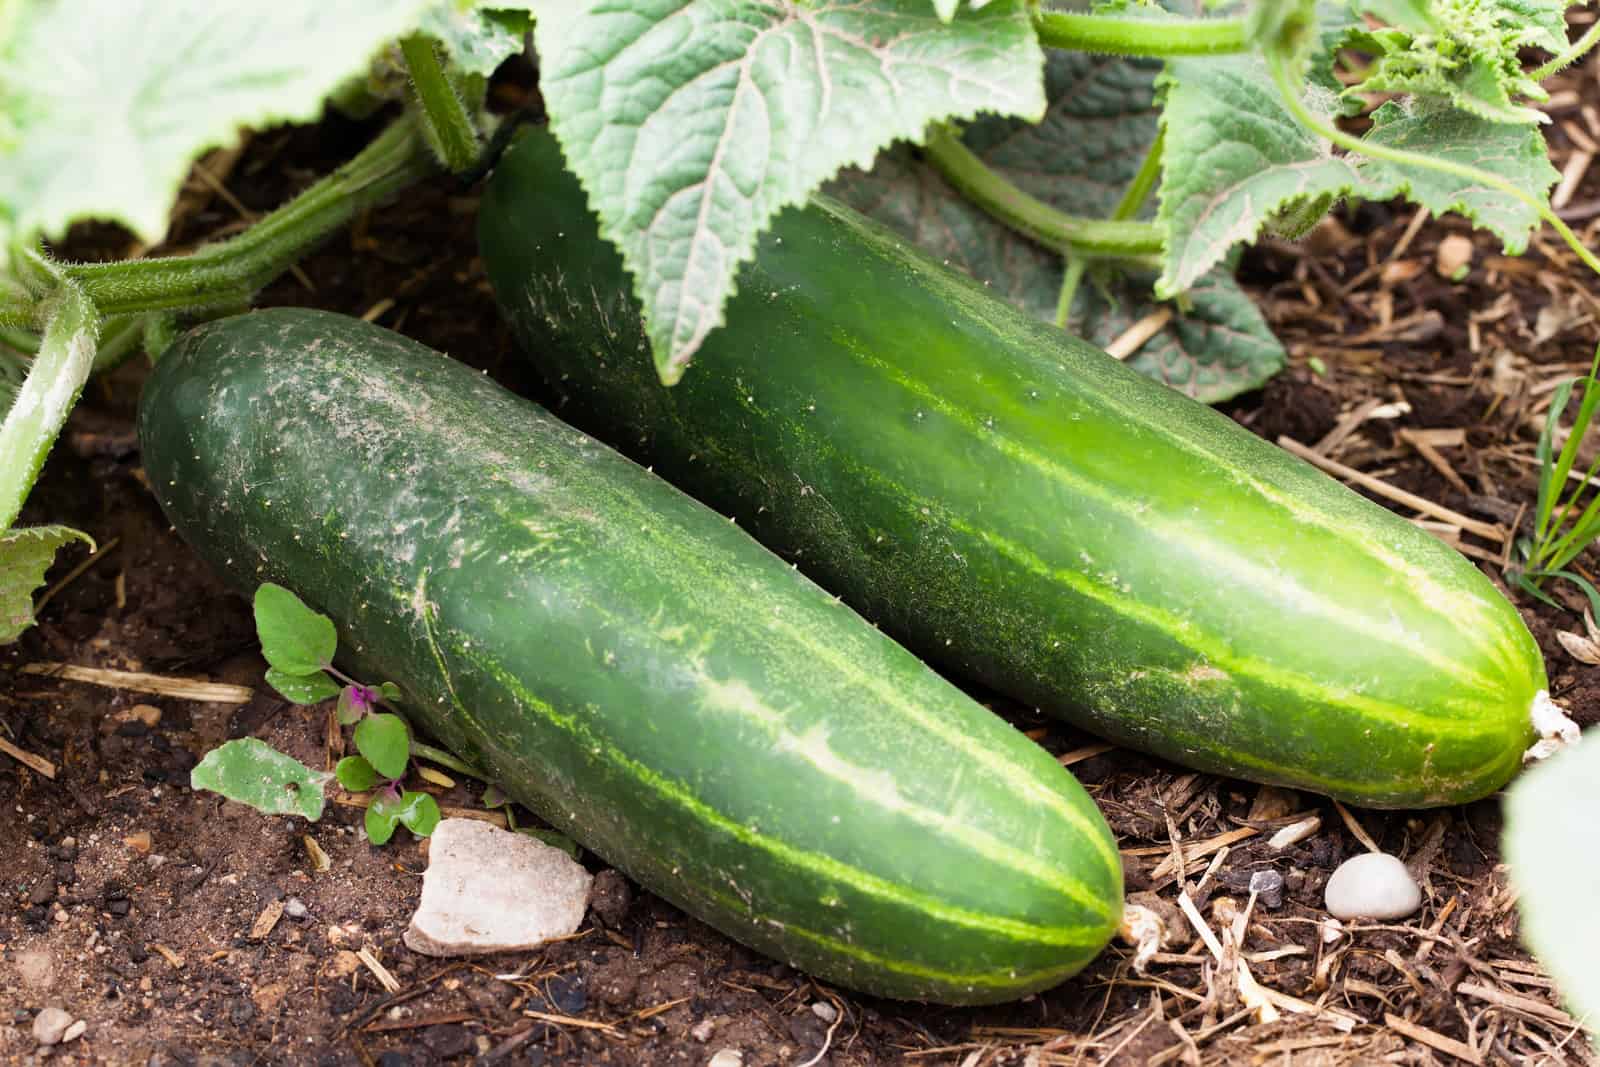 Raw Earth Colors English Cucumber Seeds for Planting Outdoors Home Garden - Burpless Hothouse Cucumber Seeds